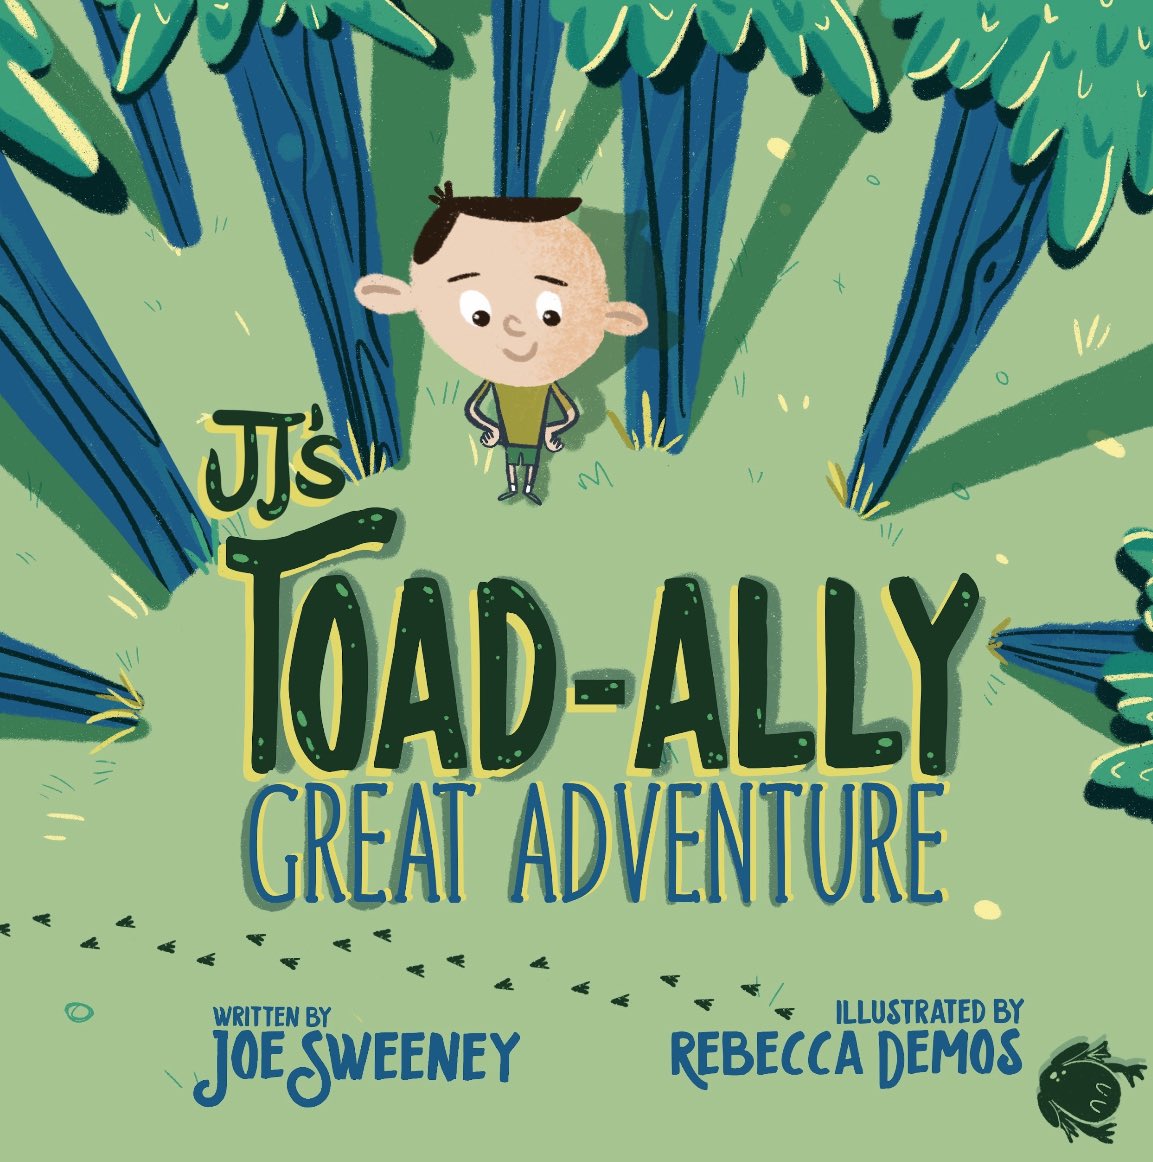 So excited to bring JJ’s Toad-Ally Great Adventure to @KerkstraCougars next Thursday at their family reading night! @MissSavage142 @miss_ellement @steve_nendza! Going to be an awesome night!